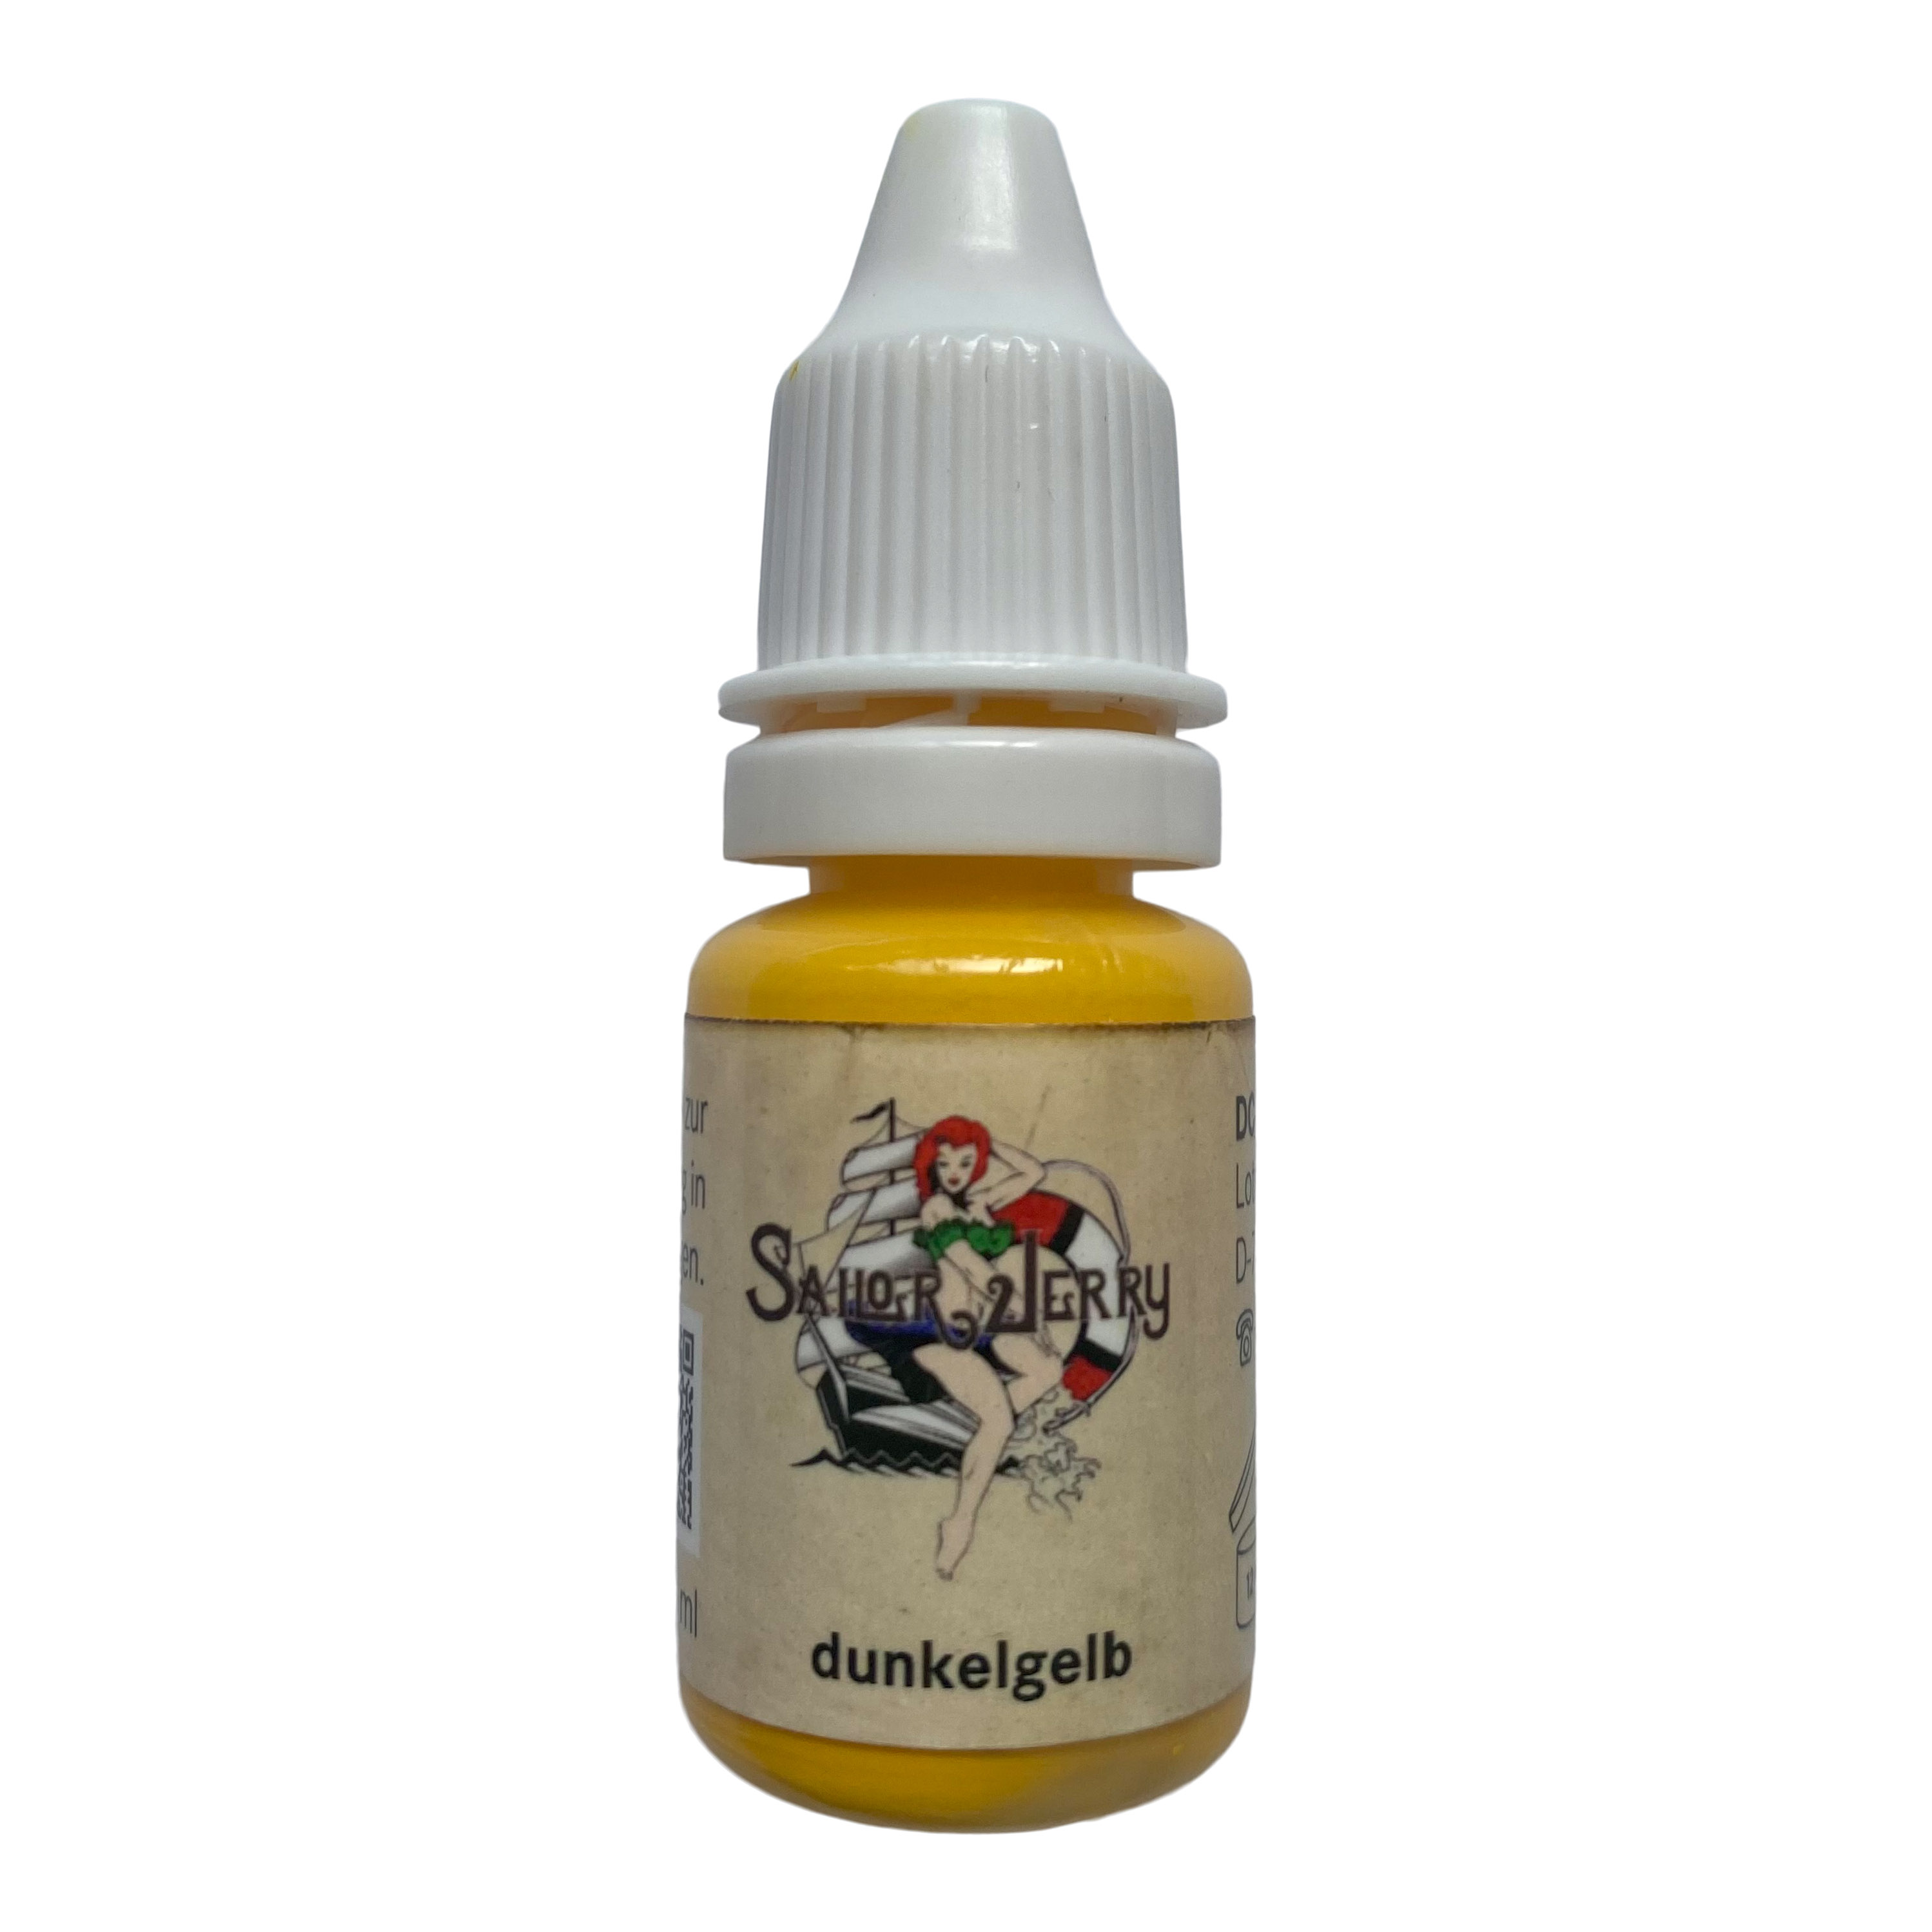 Preview: REACH-konforme Sailor Jerry Tattoofarbe, dunkelgelb, 10ml